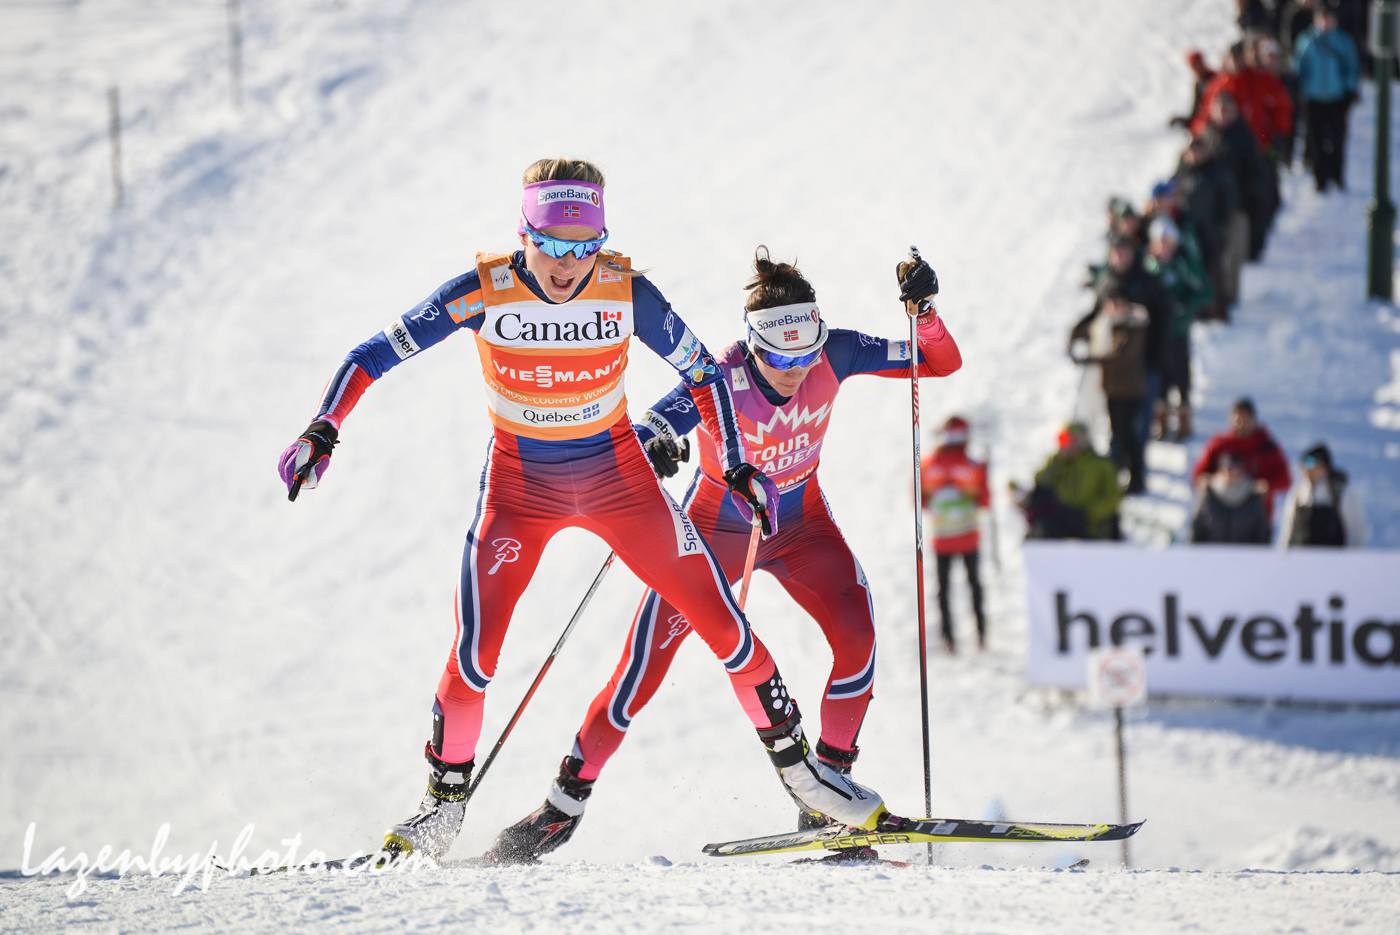 Challenged by Compatriot, Weng Beats Johaug; Diggins Fifth, Bjornsen 10th for U.S.